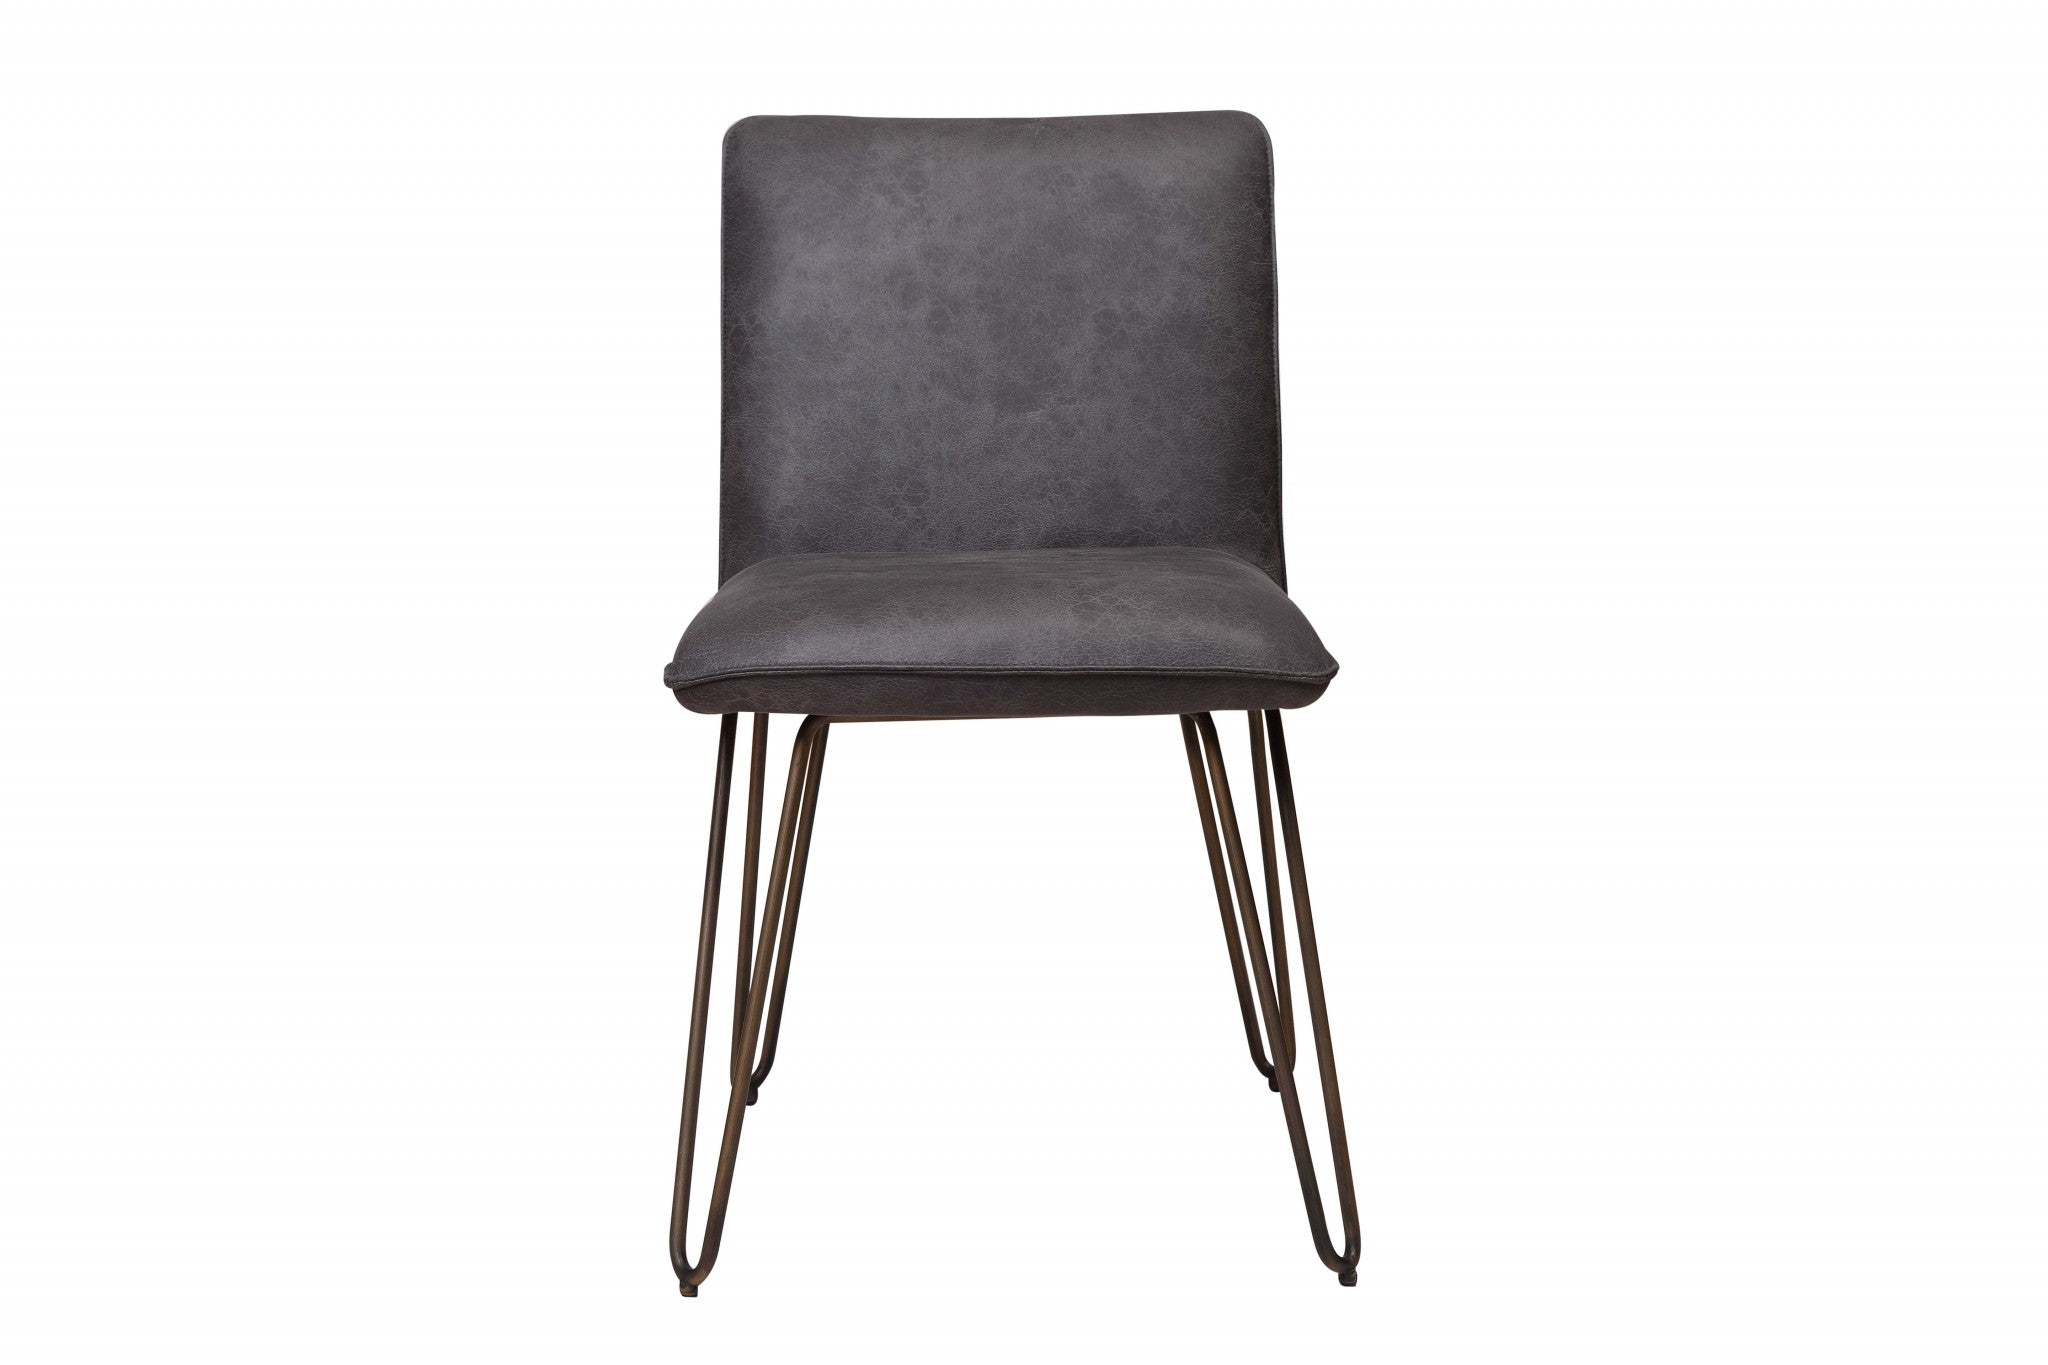 Slate Gray Faux Leather Dining Or Side Chair